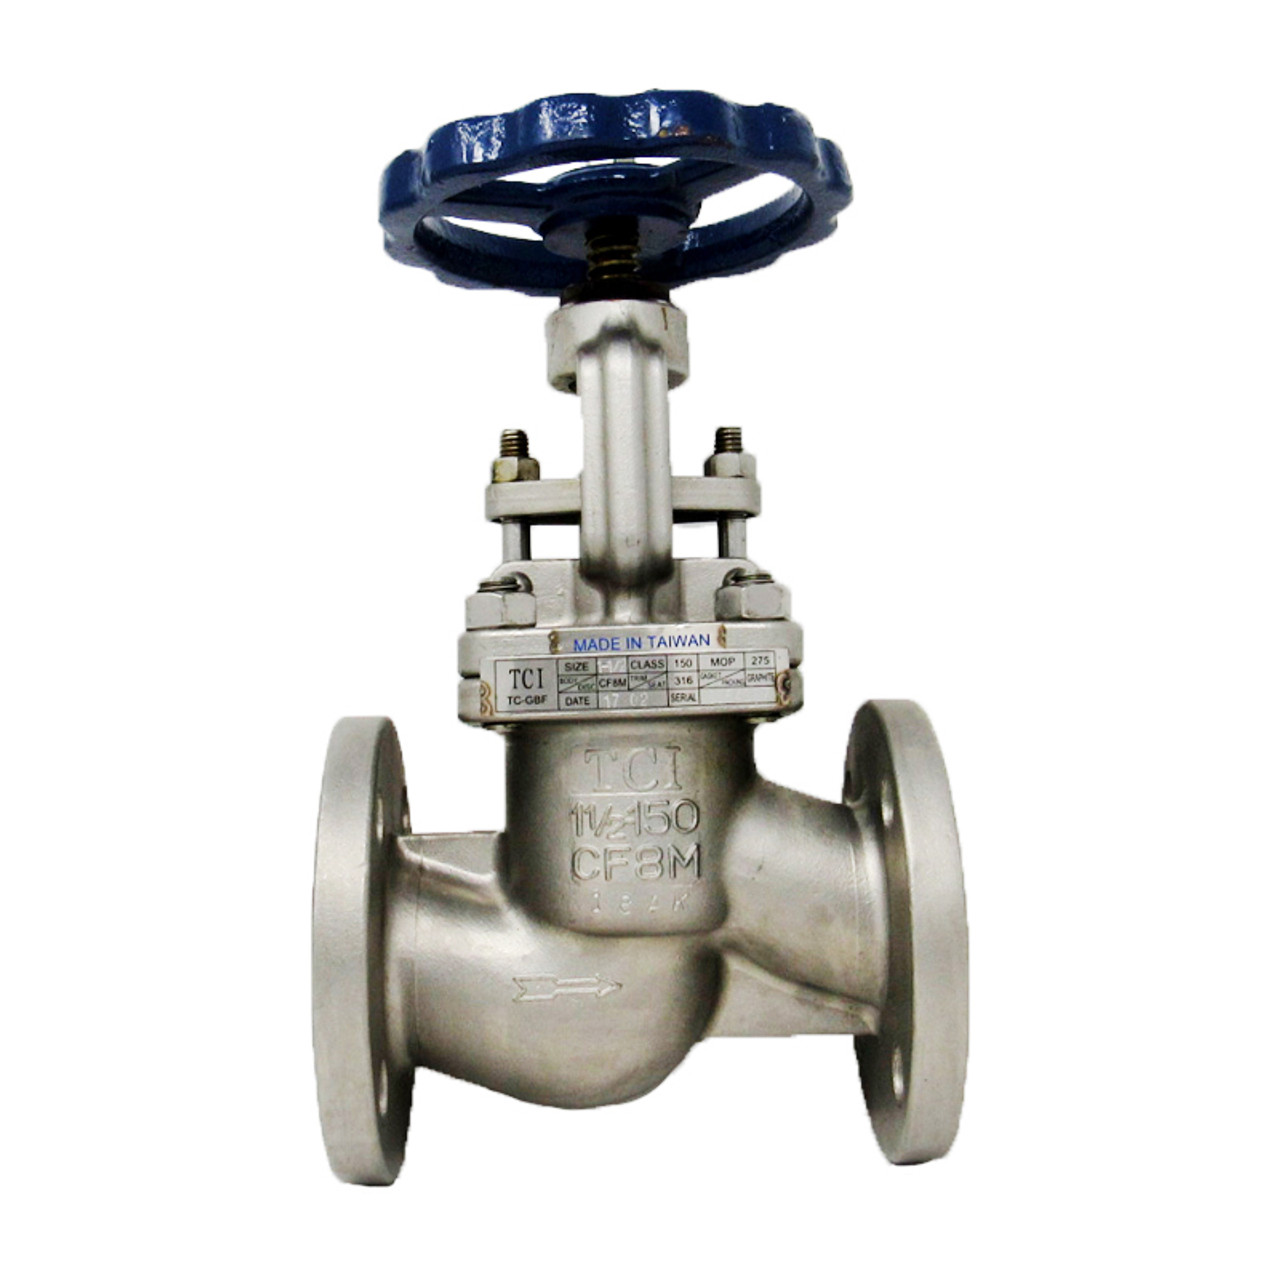 The Selection Principle Of The Globe Valve